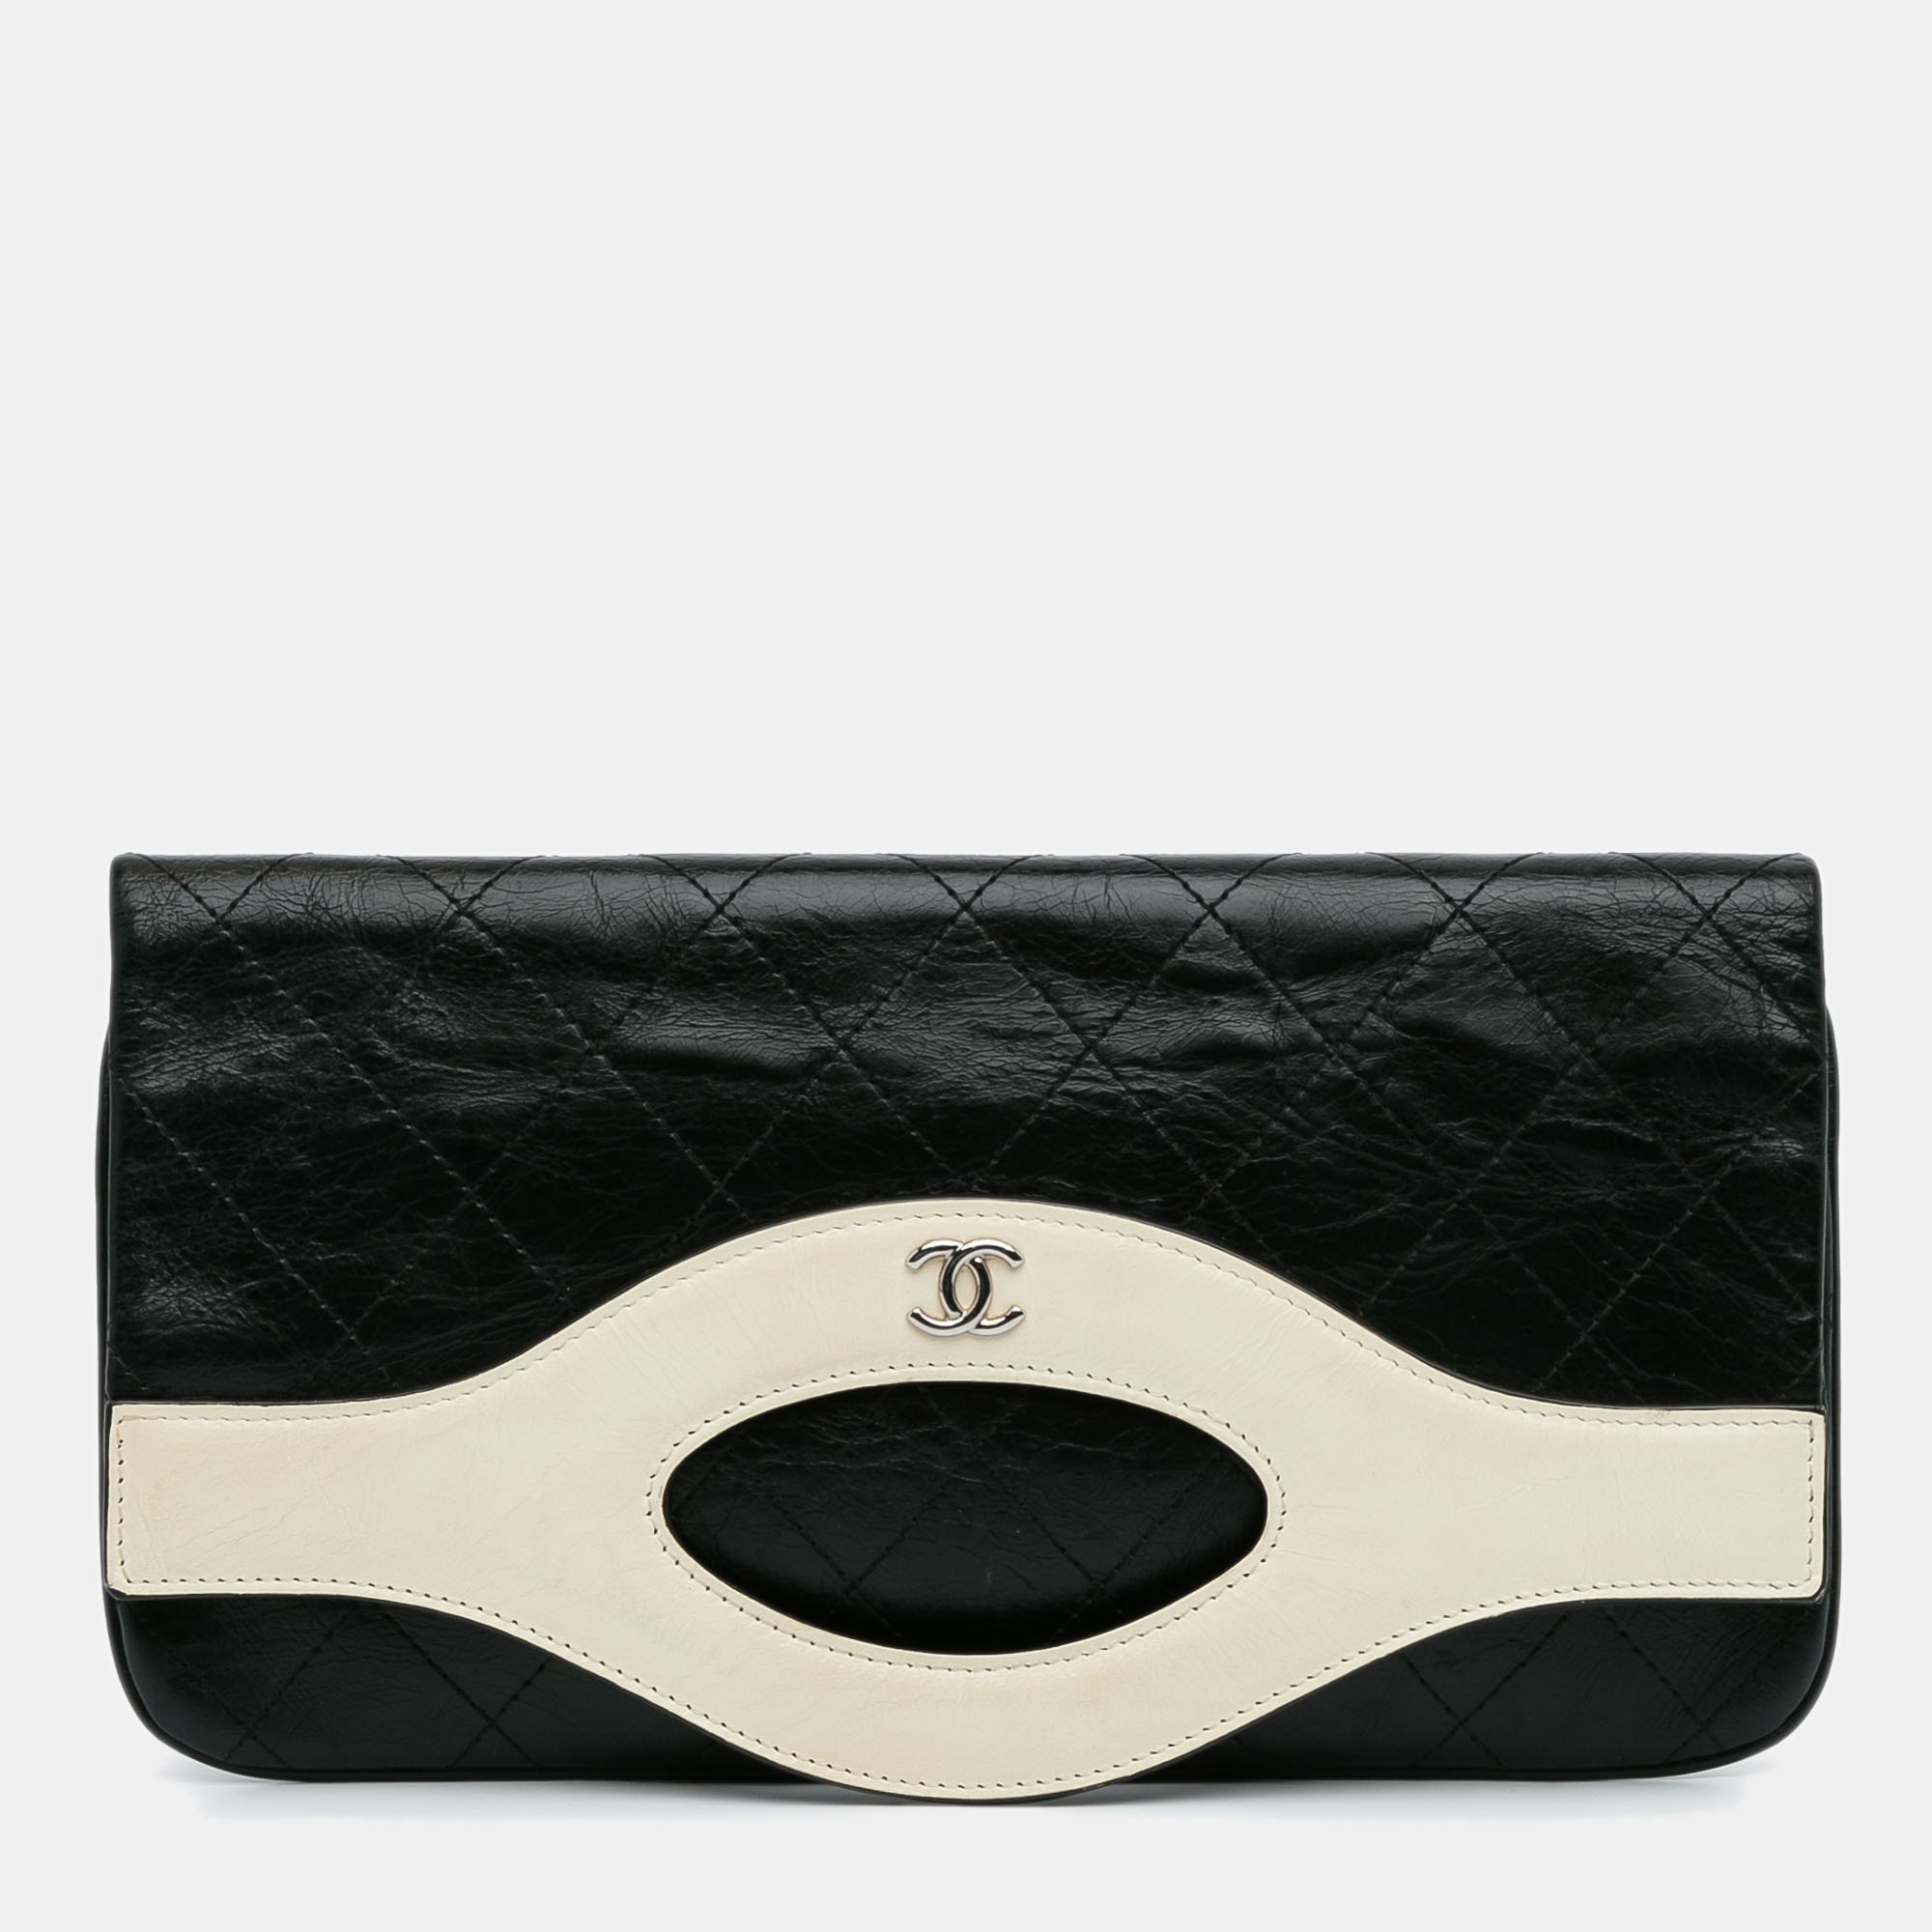 Chanel black leather small 31 clutch